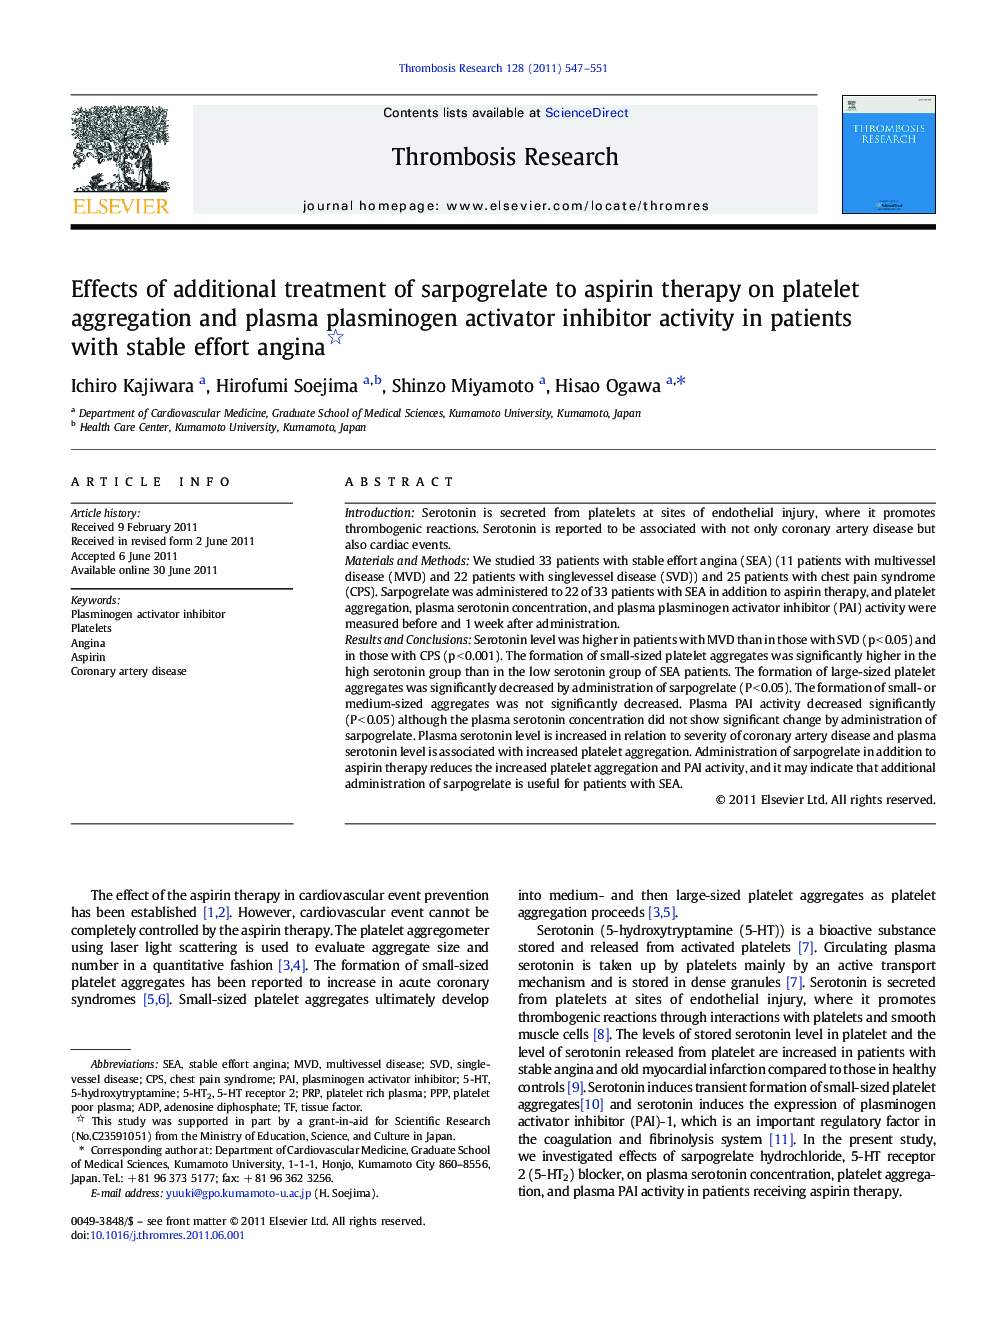 Effects of additional treatment of sarpogrelate to aspirin therapy on platelet aggregation and plasma plasminogen activator inhibitor activity in patients with stable effort angina 